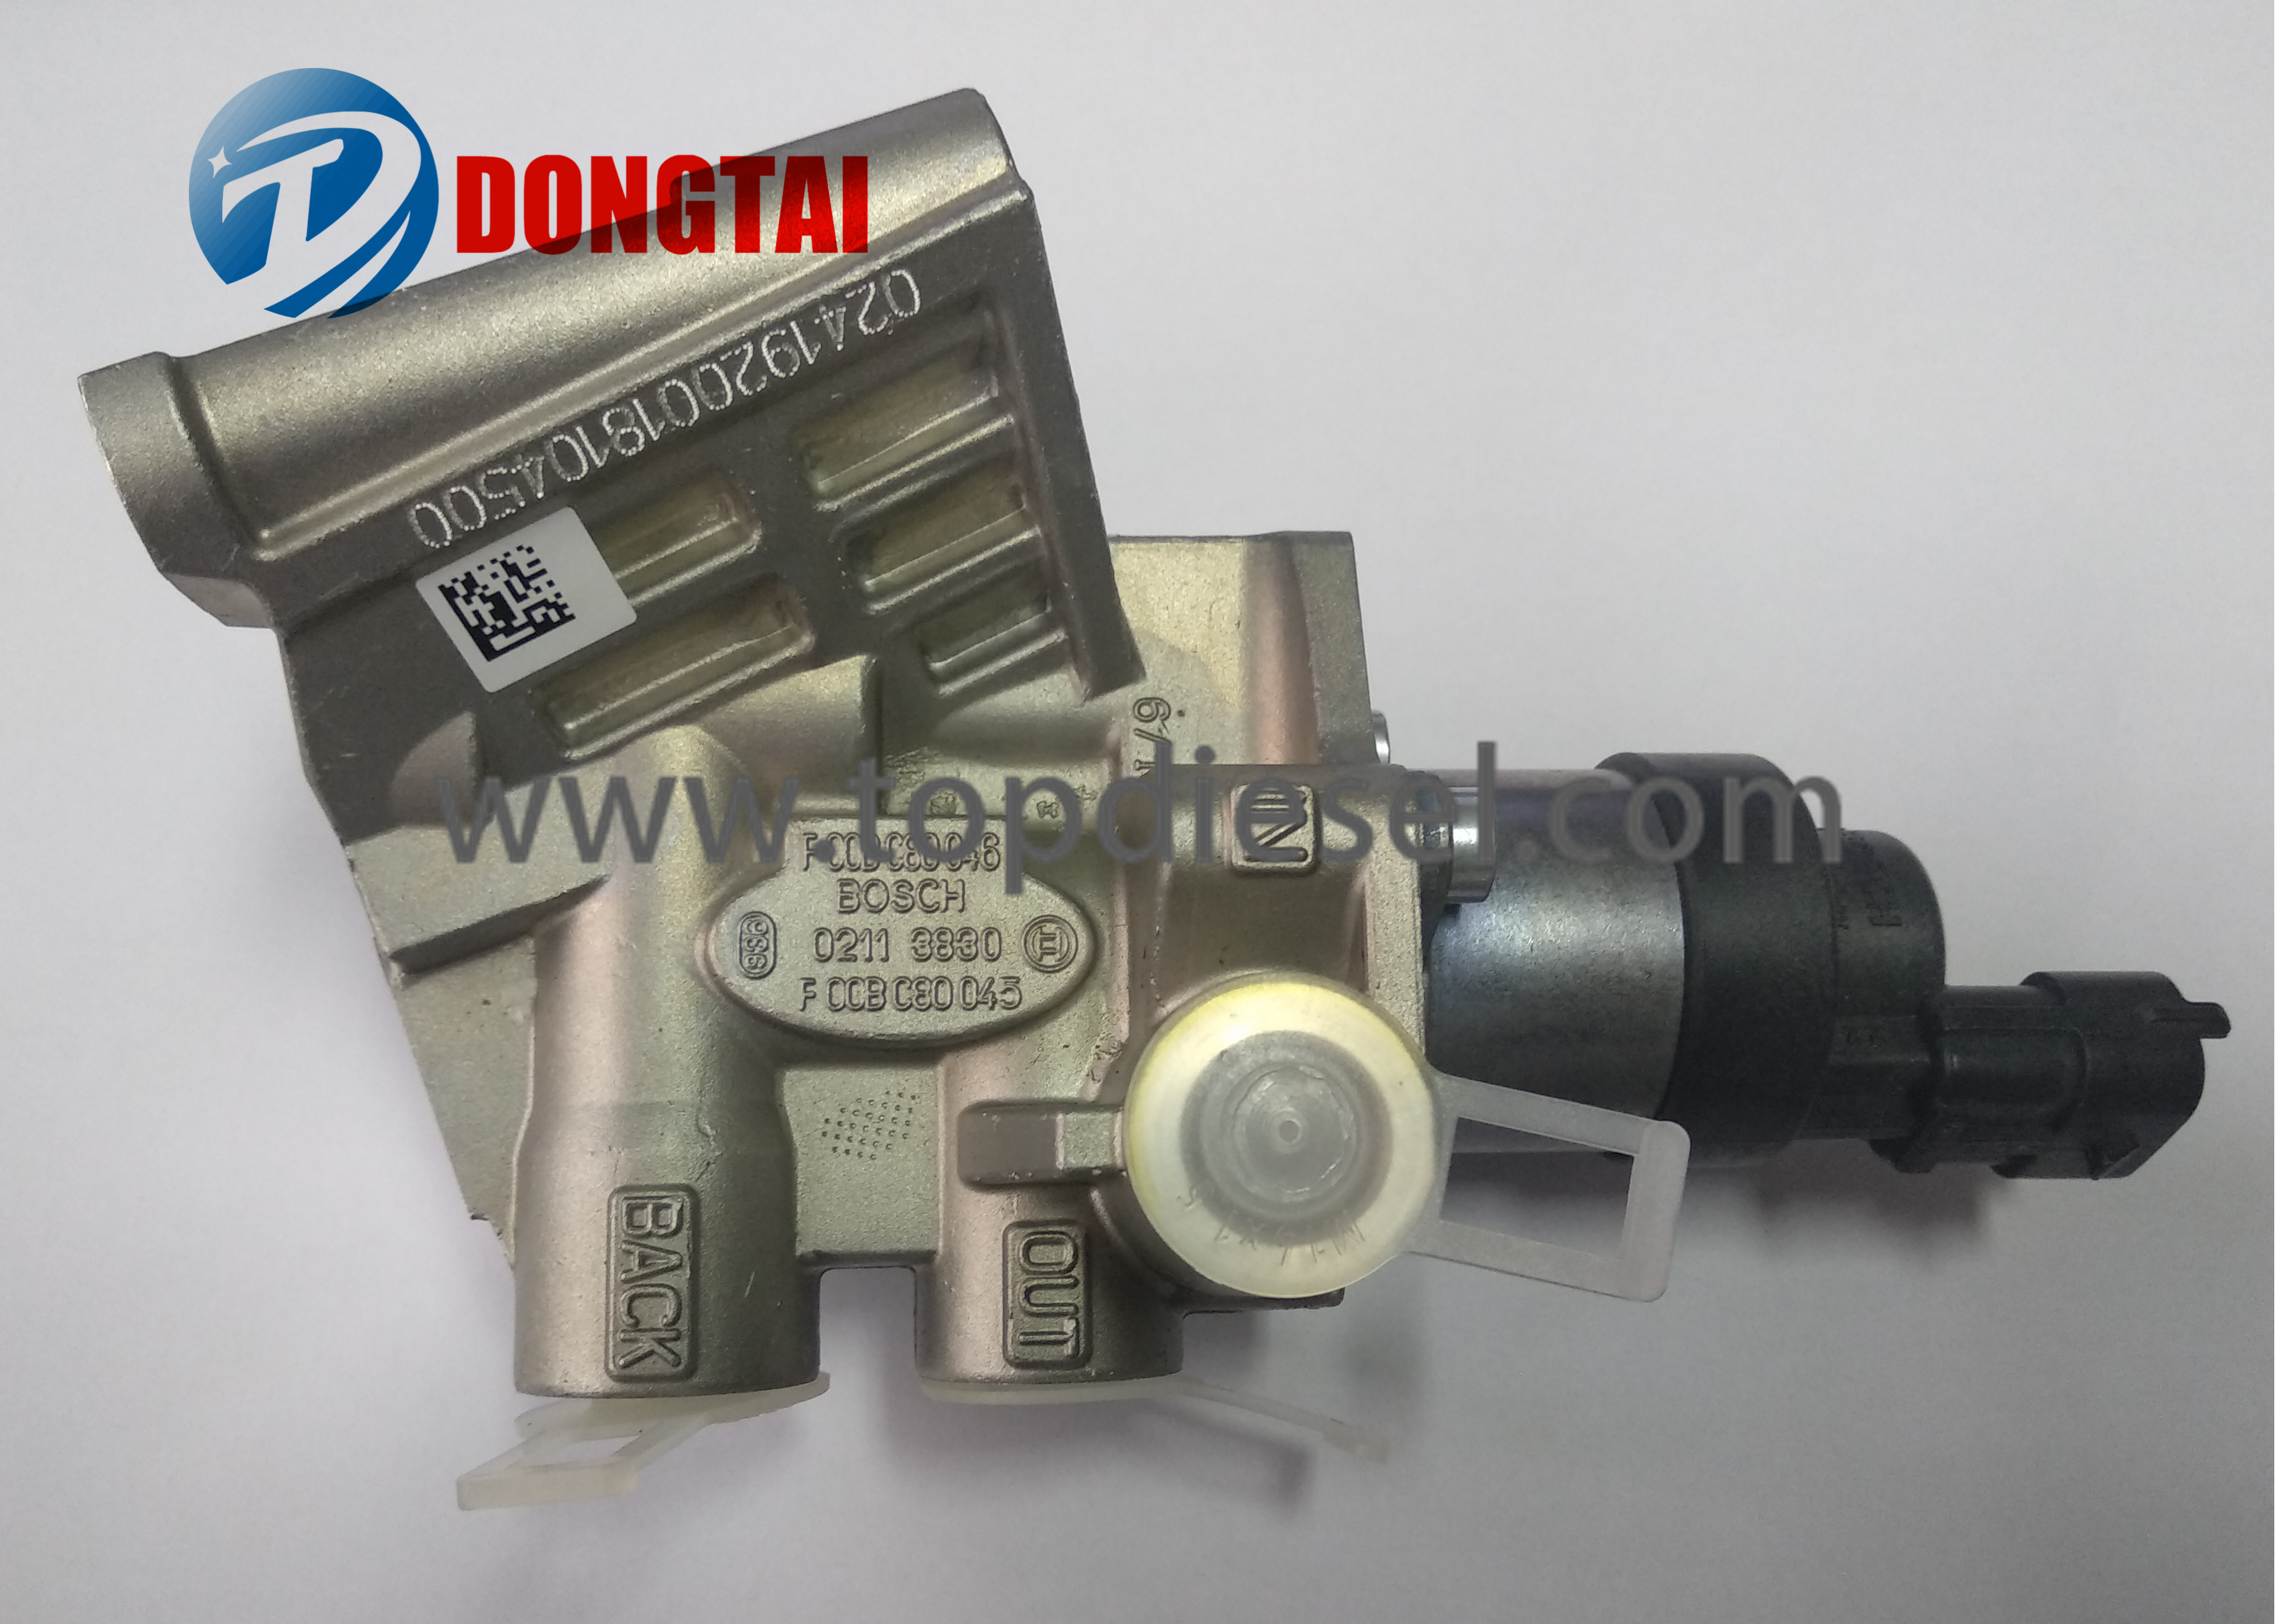 Excellent quality High Pressure Common Rail Test Stand - No.536(2) Original Bosch Fuel Metering Valve F 00B C80 045/ F 00B C80 046 – Dongtai